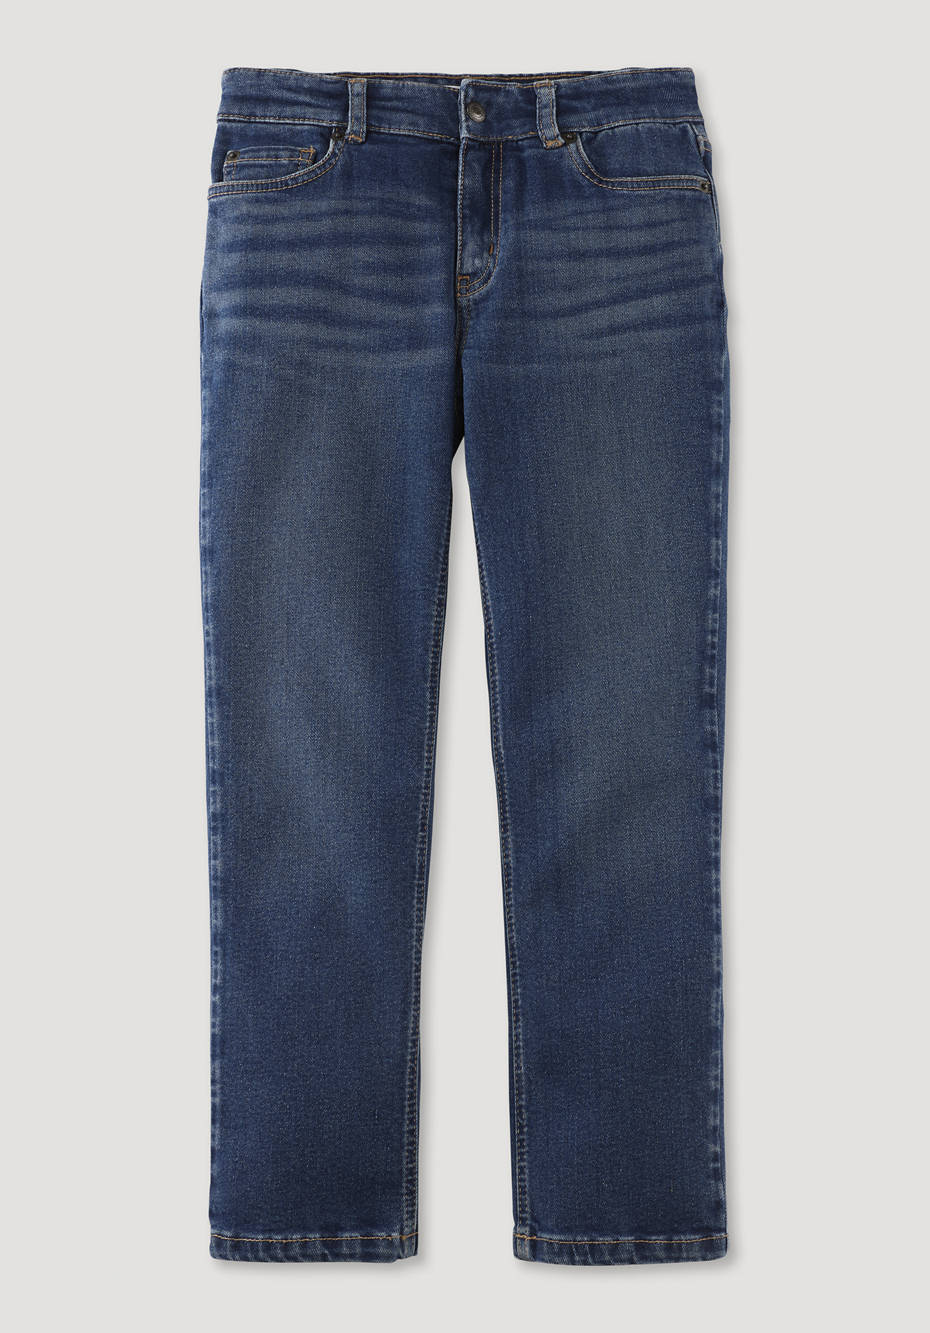 Jeans BetterRecycled made from organic cotton